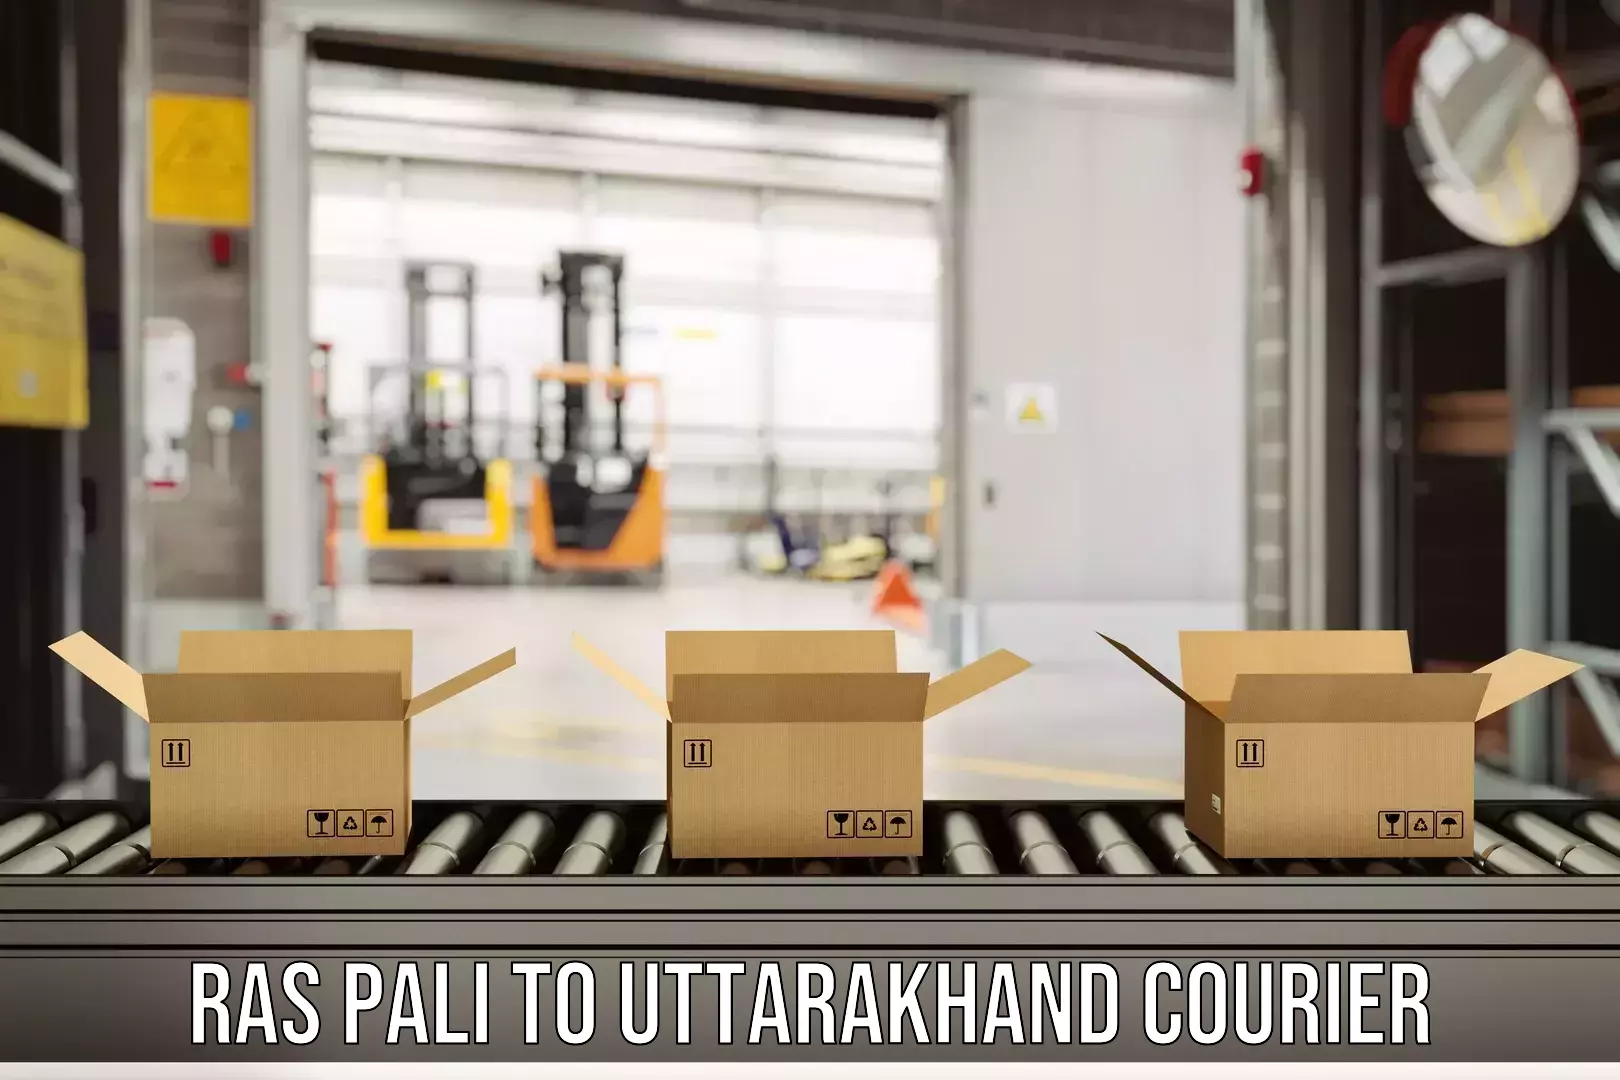 Advanced courier platforms Ras Pali to IIT Roorkee